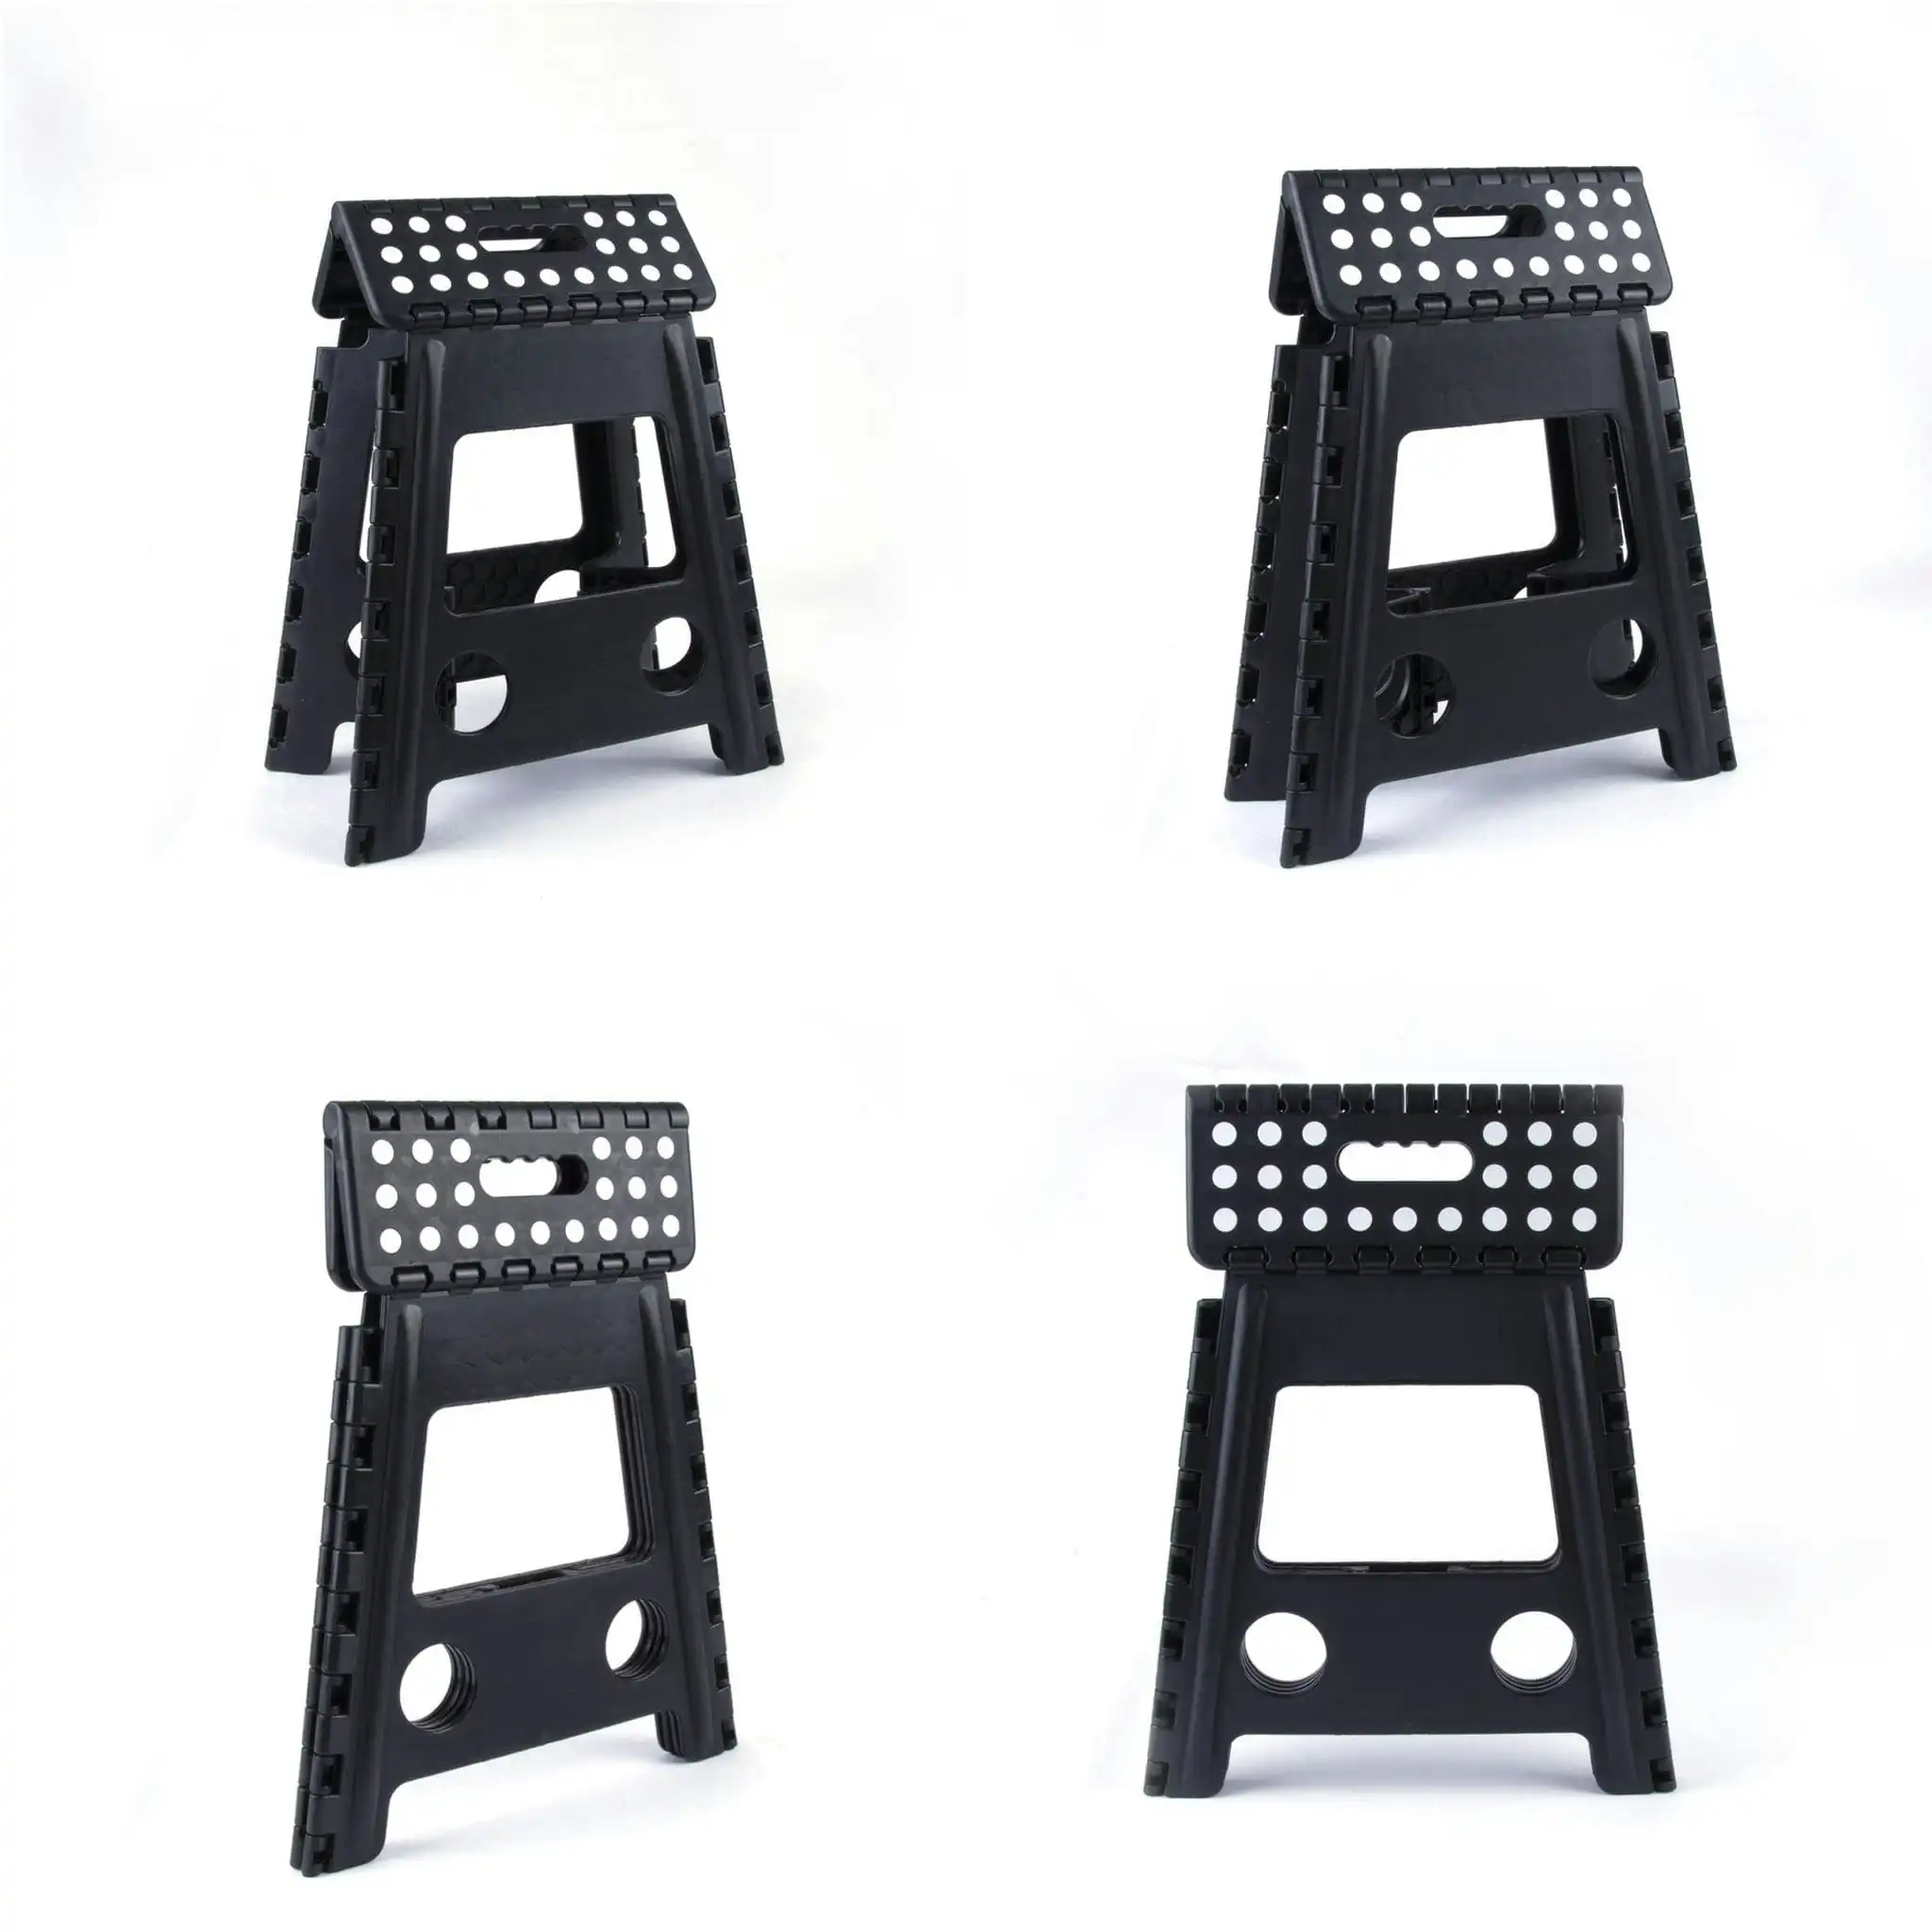 Large Plastic Folding Stool Portable Chair Outdoor Camping Black